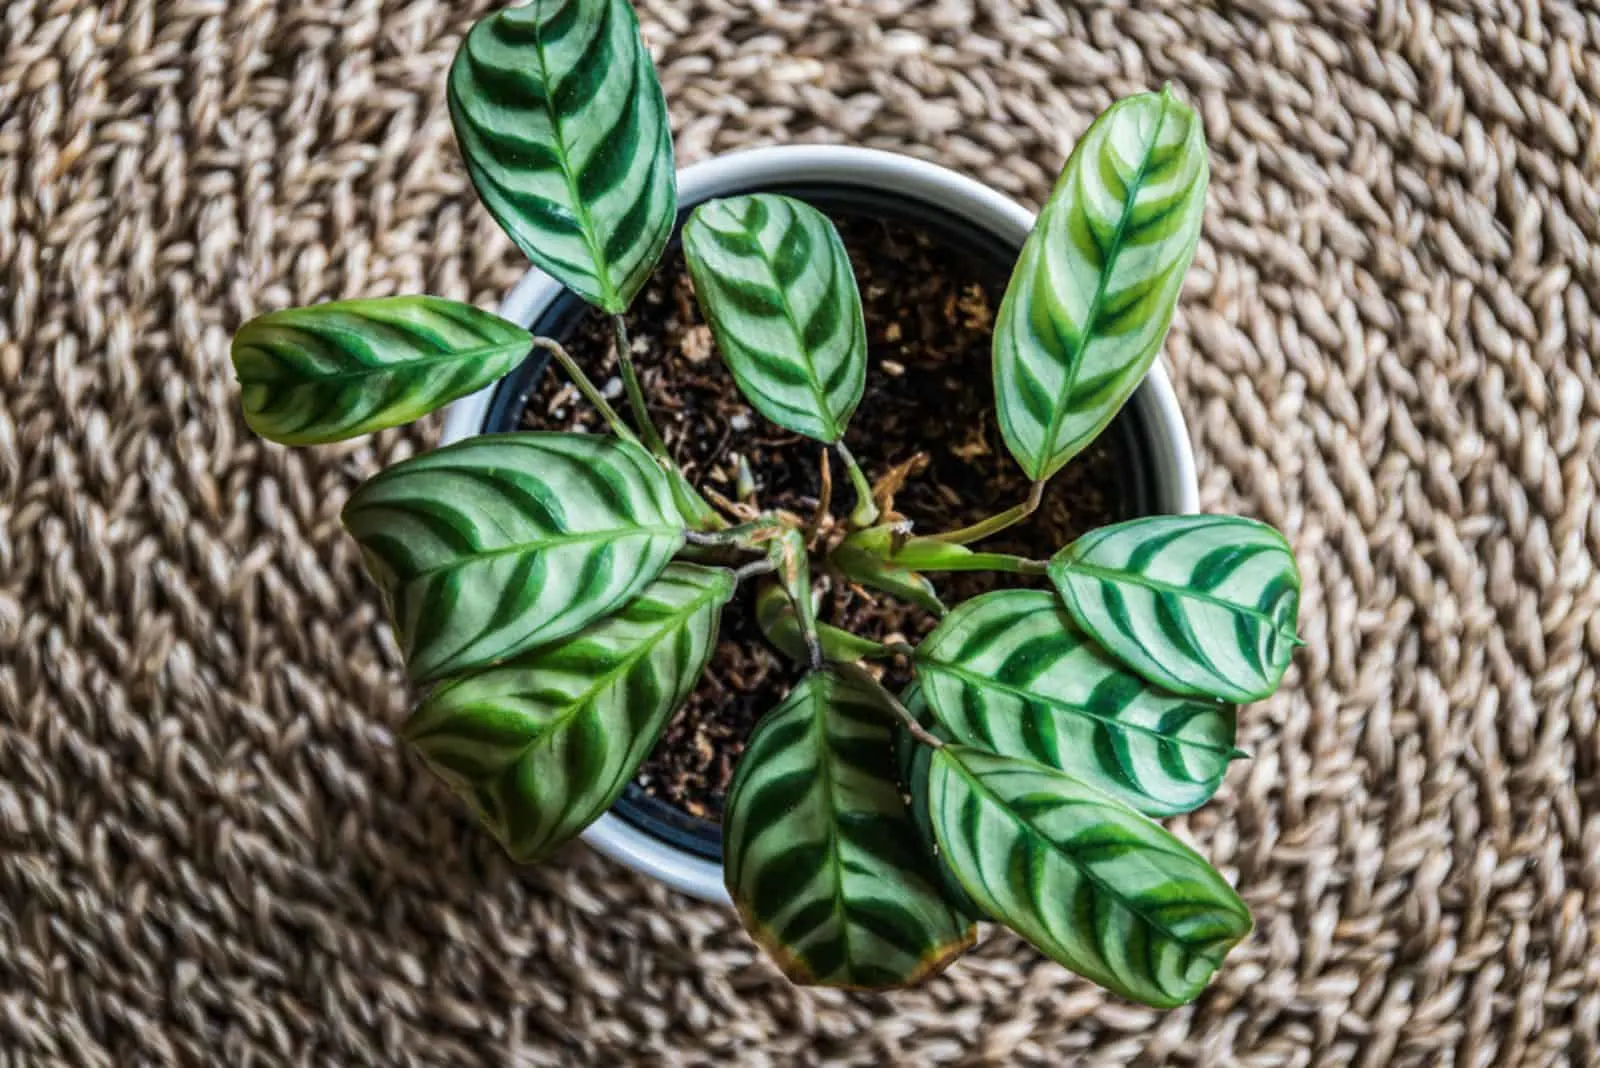 Top-down view of a fishbone prayer plant